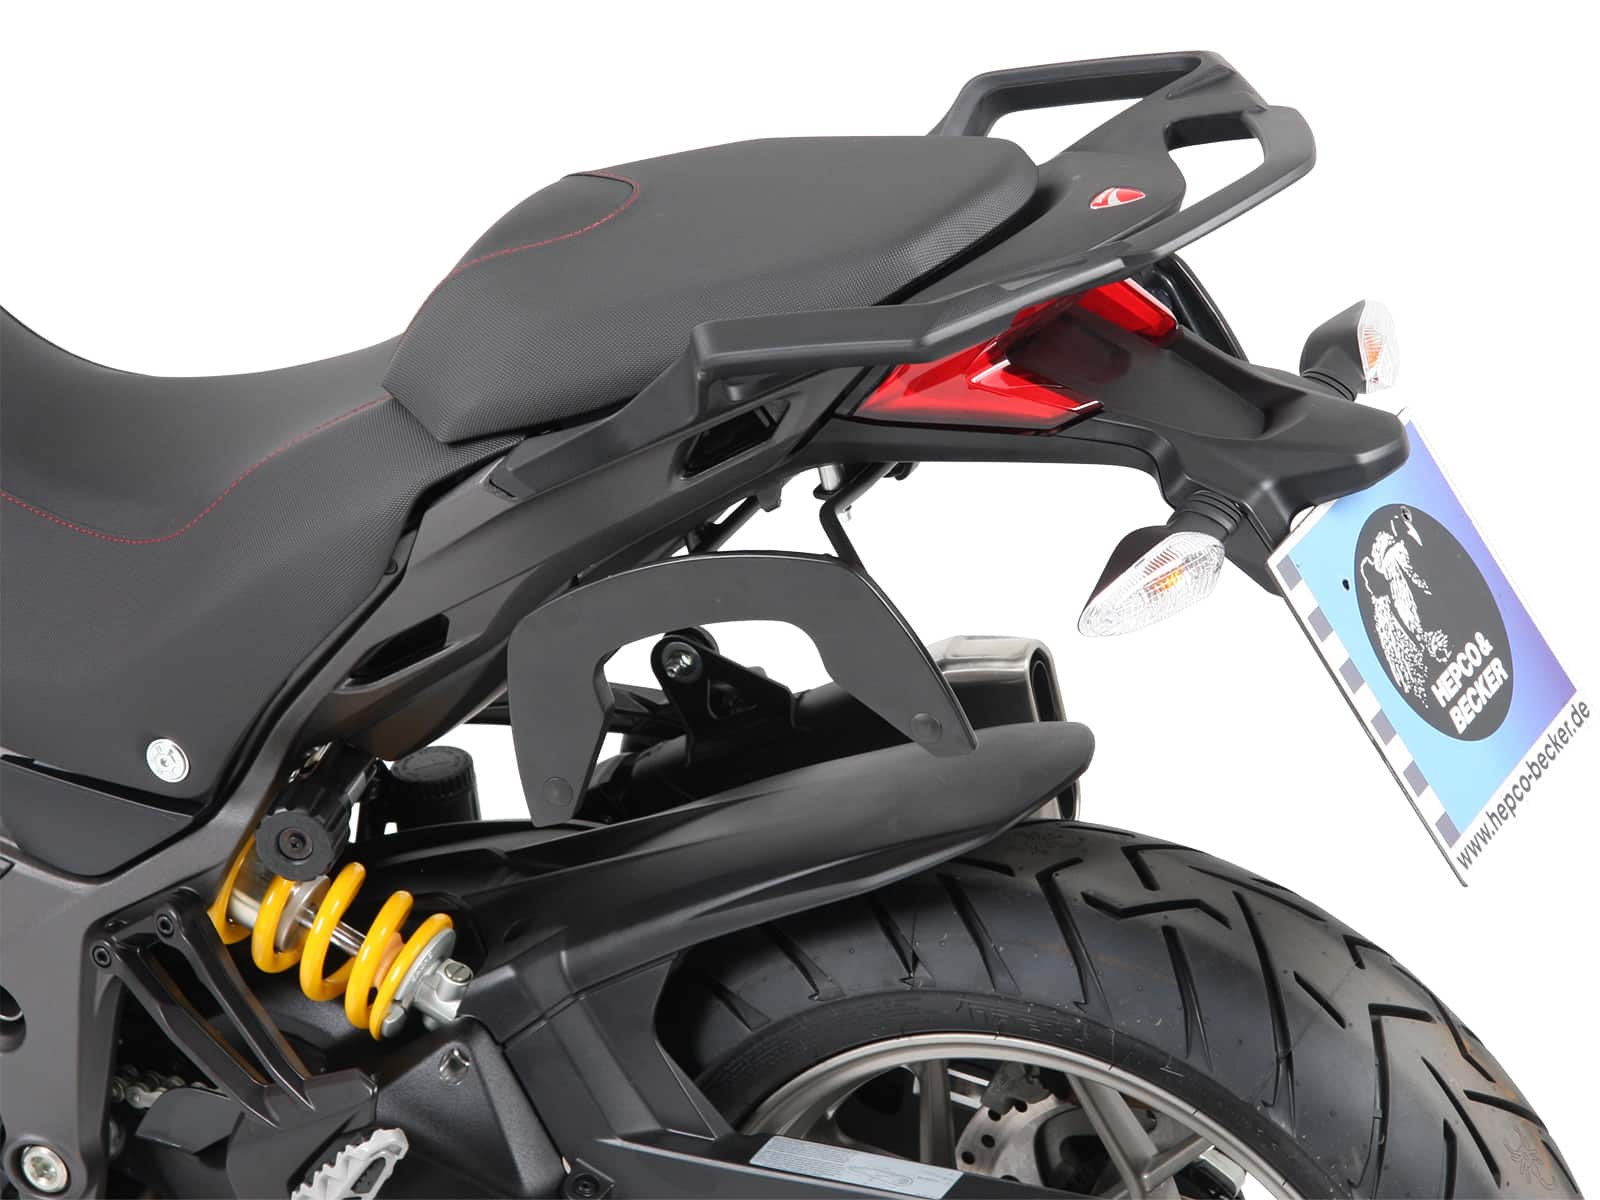 C-Bow sidecarrier black for Ducati Multistrada 950/S (2017-)